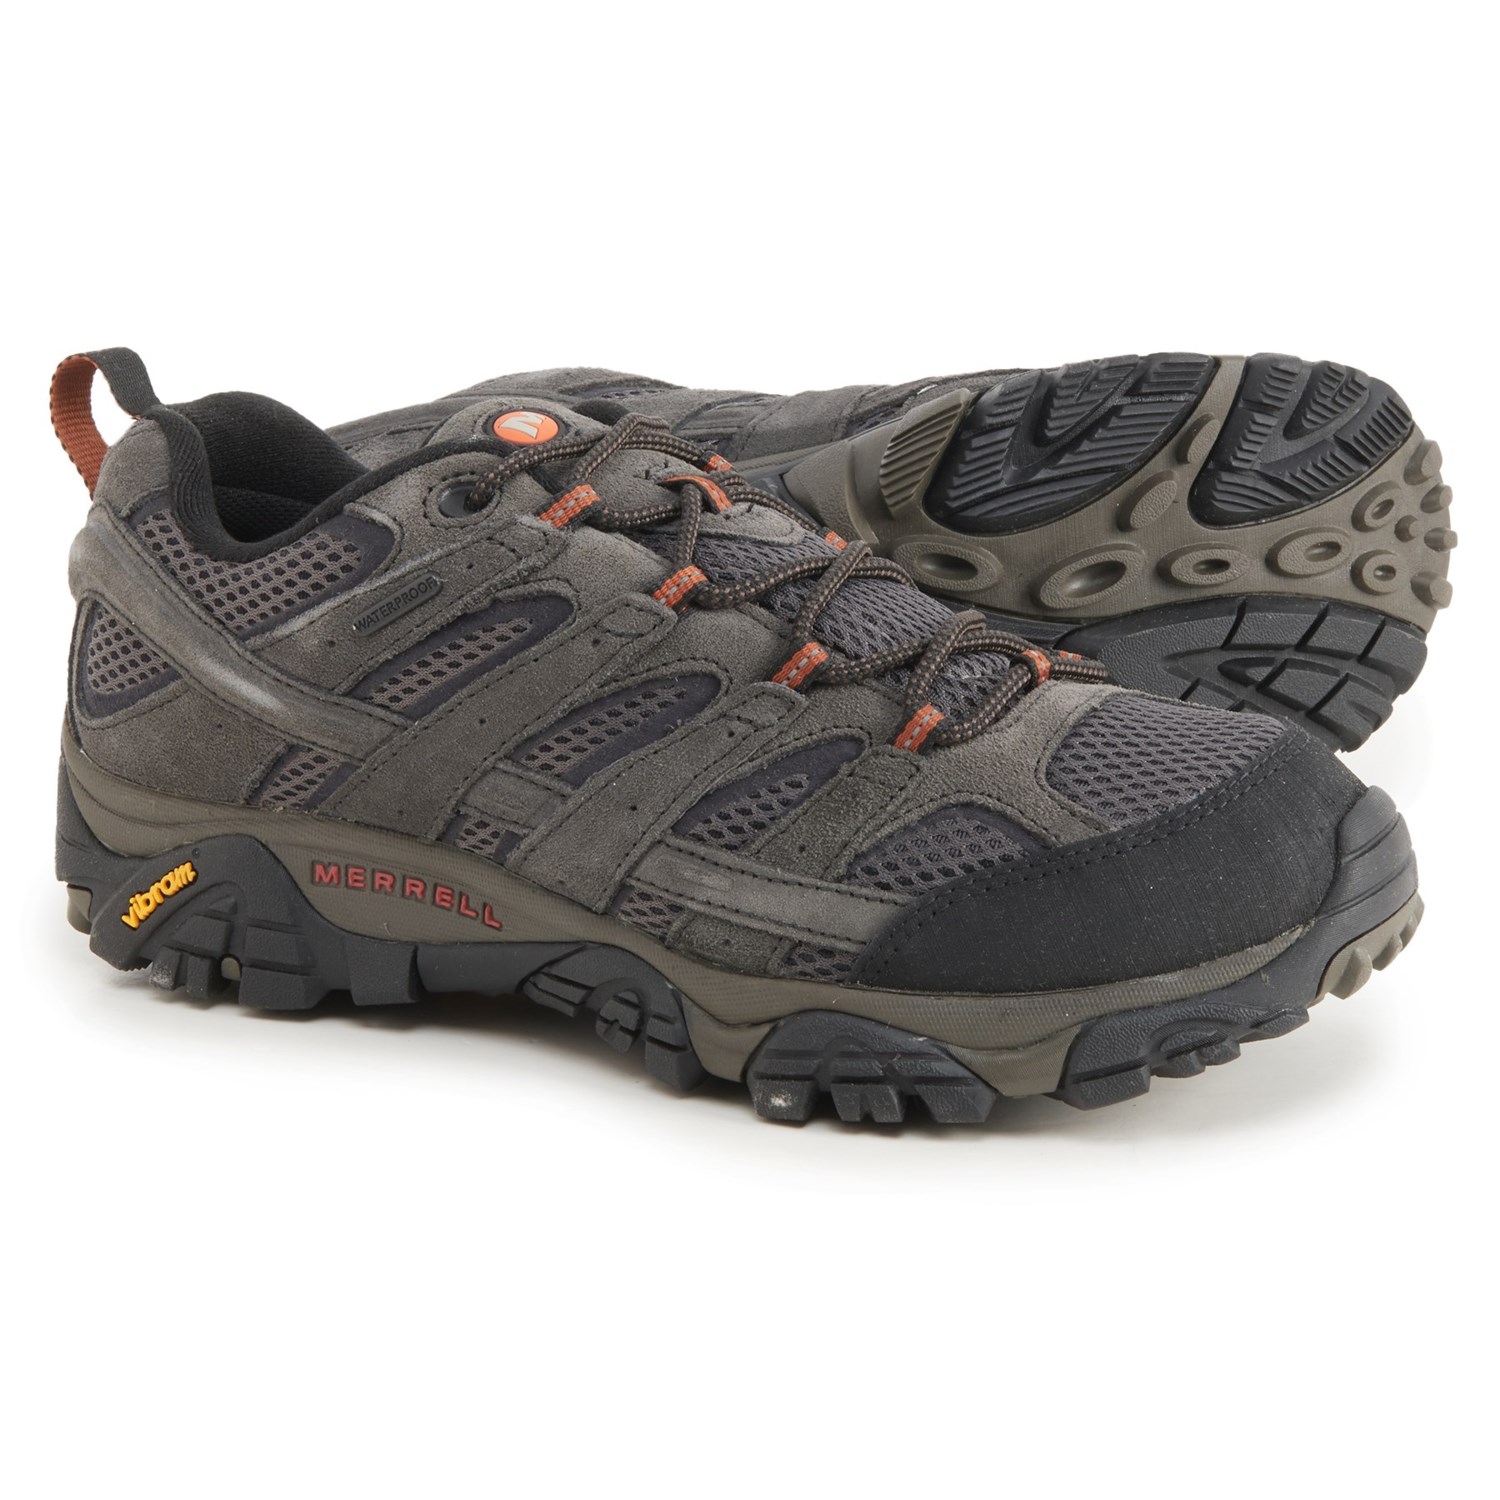 Merrell Moab 2 Hiking Shoes (For Men) - Save